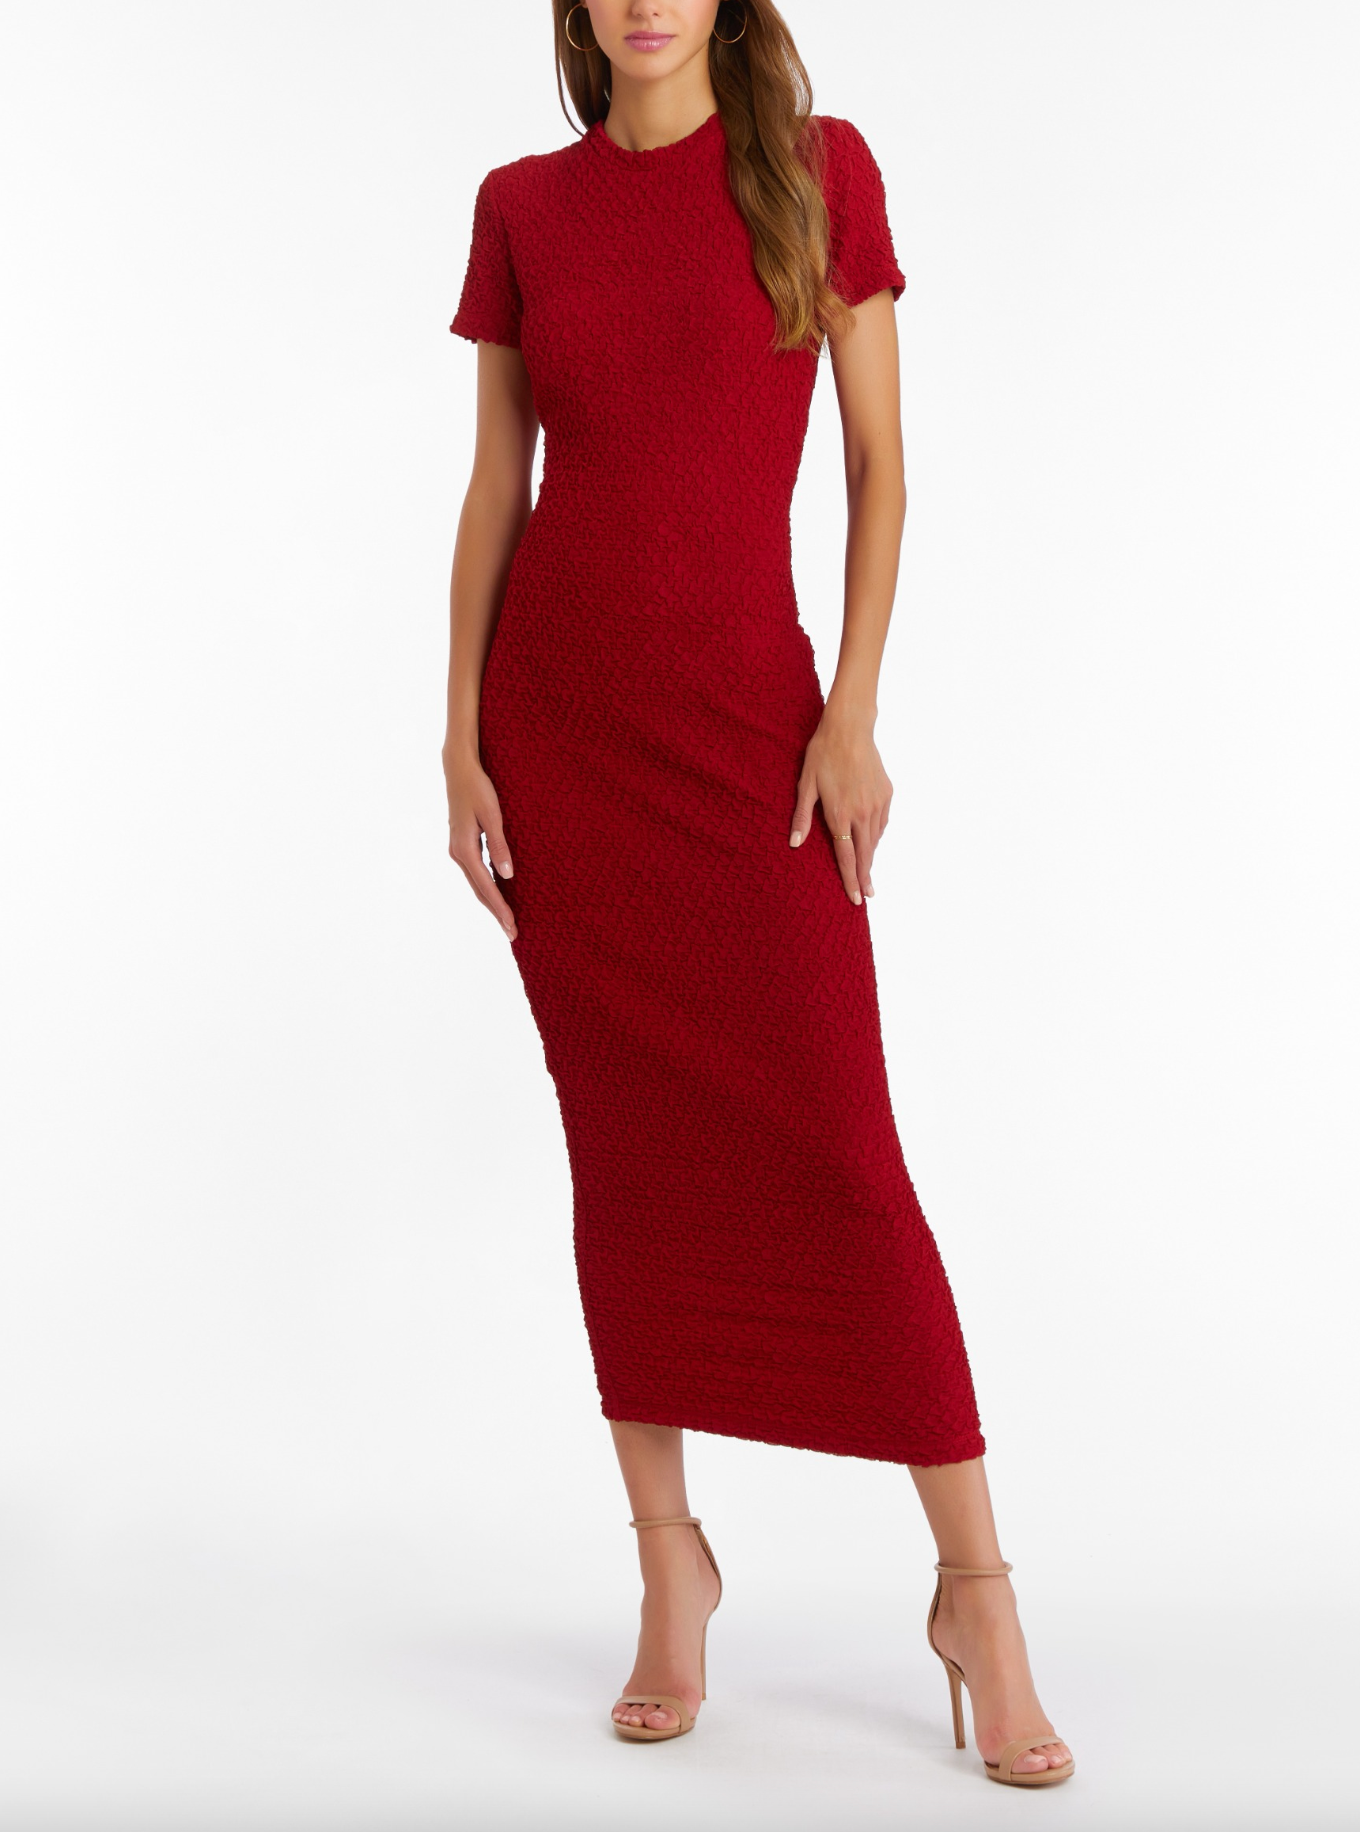 Rosaria Dress in Knit